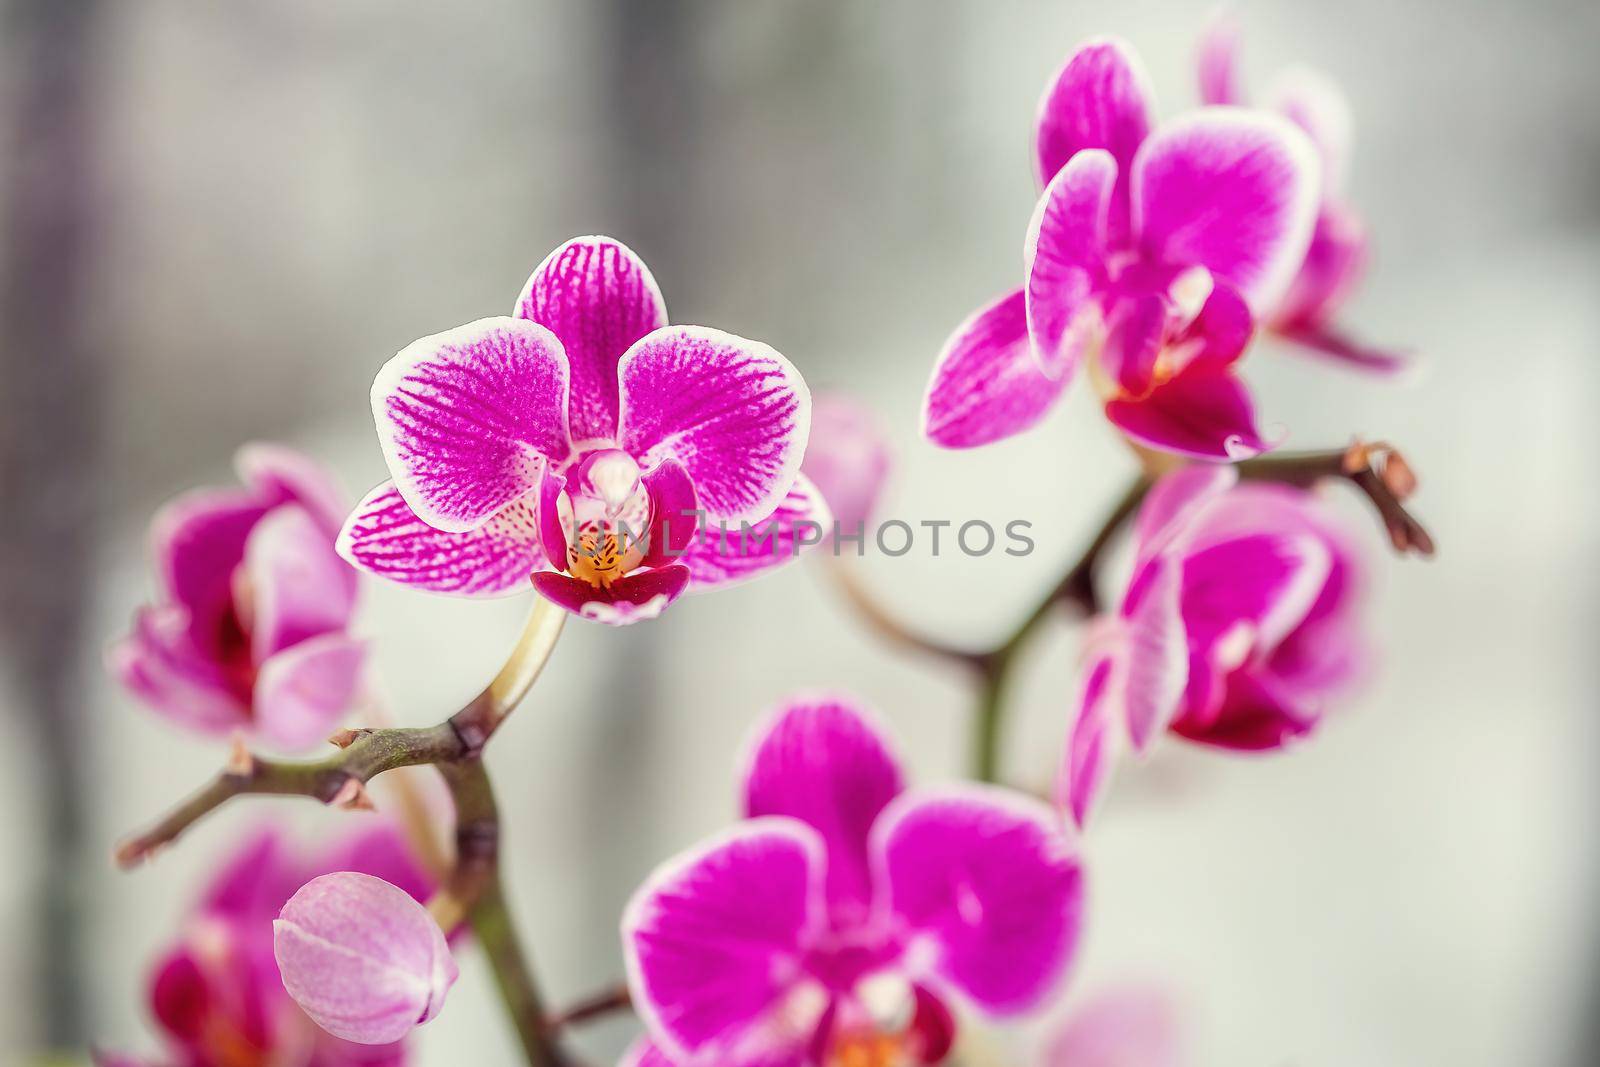 Violet Phalaenopsis orchid flowers are photographed in front of a window by galinasharapova